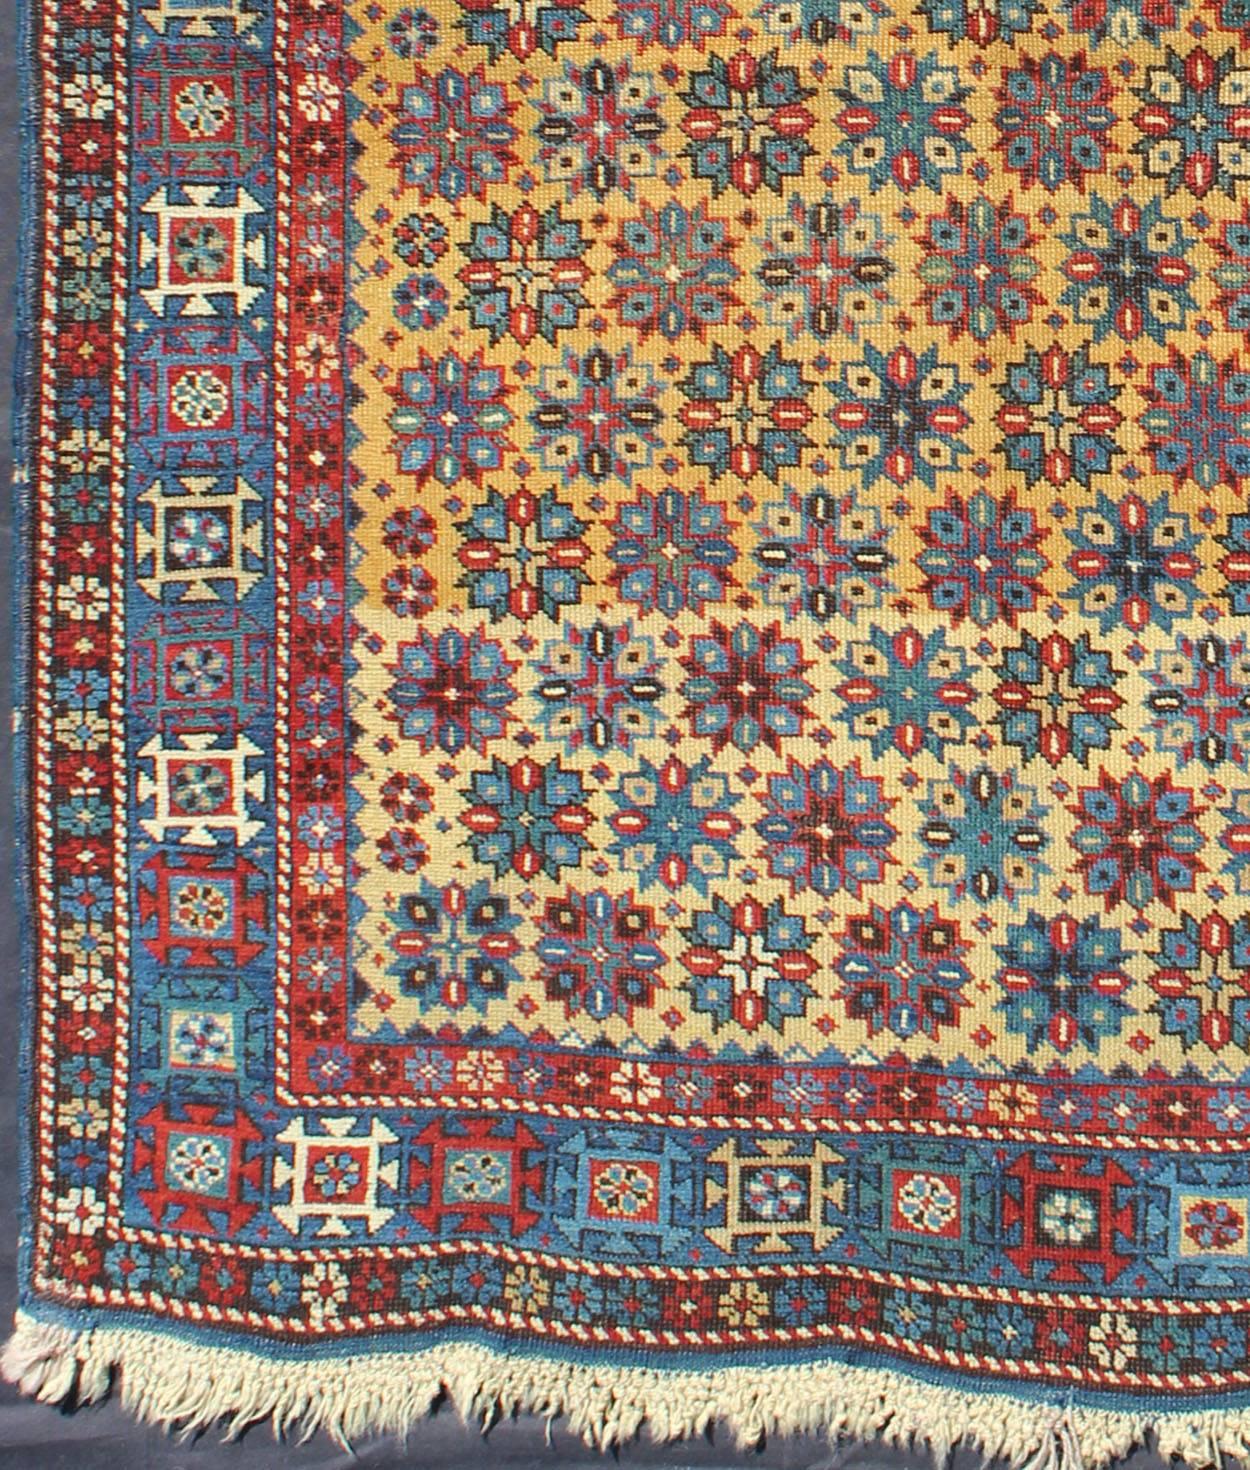 Antique Caucasian Shirvan Rug in Yellow  Background  Rug #L11-0603, Antique Caucasian, Antique Shirvan 

An important late 19th Century Shirvan rug from the northeast Caucasus region. The rare and highly prized yellow field is deeply saturated and